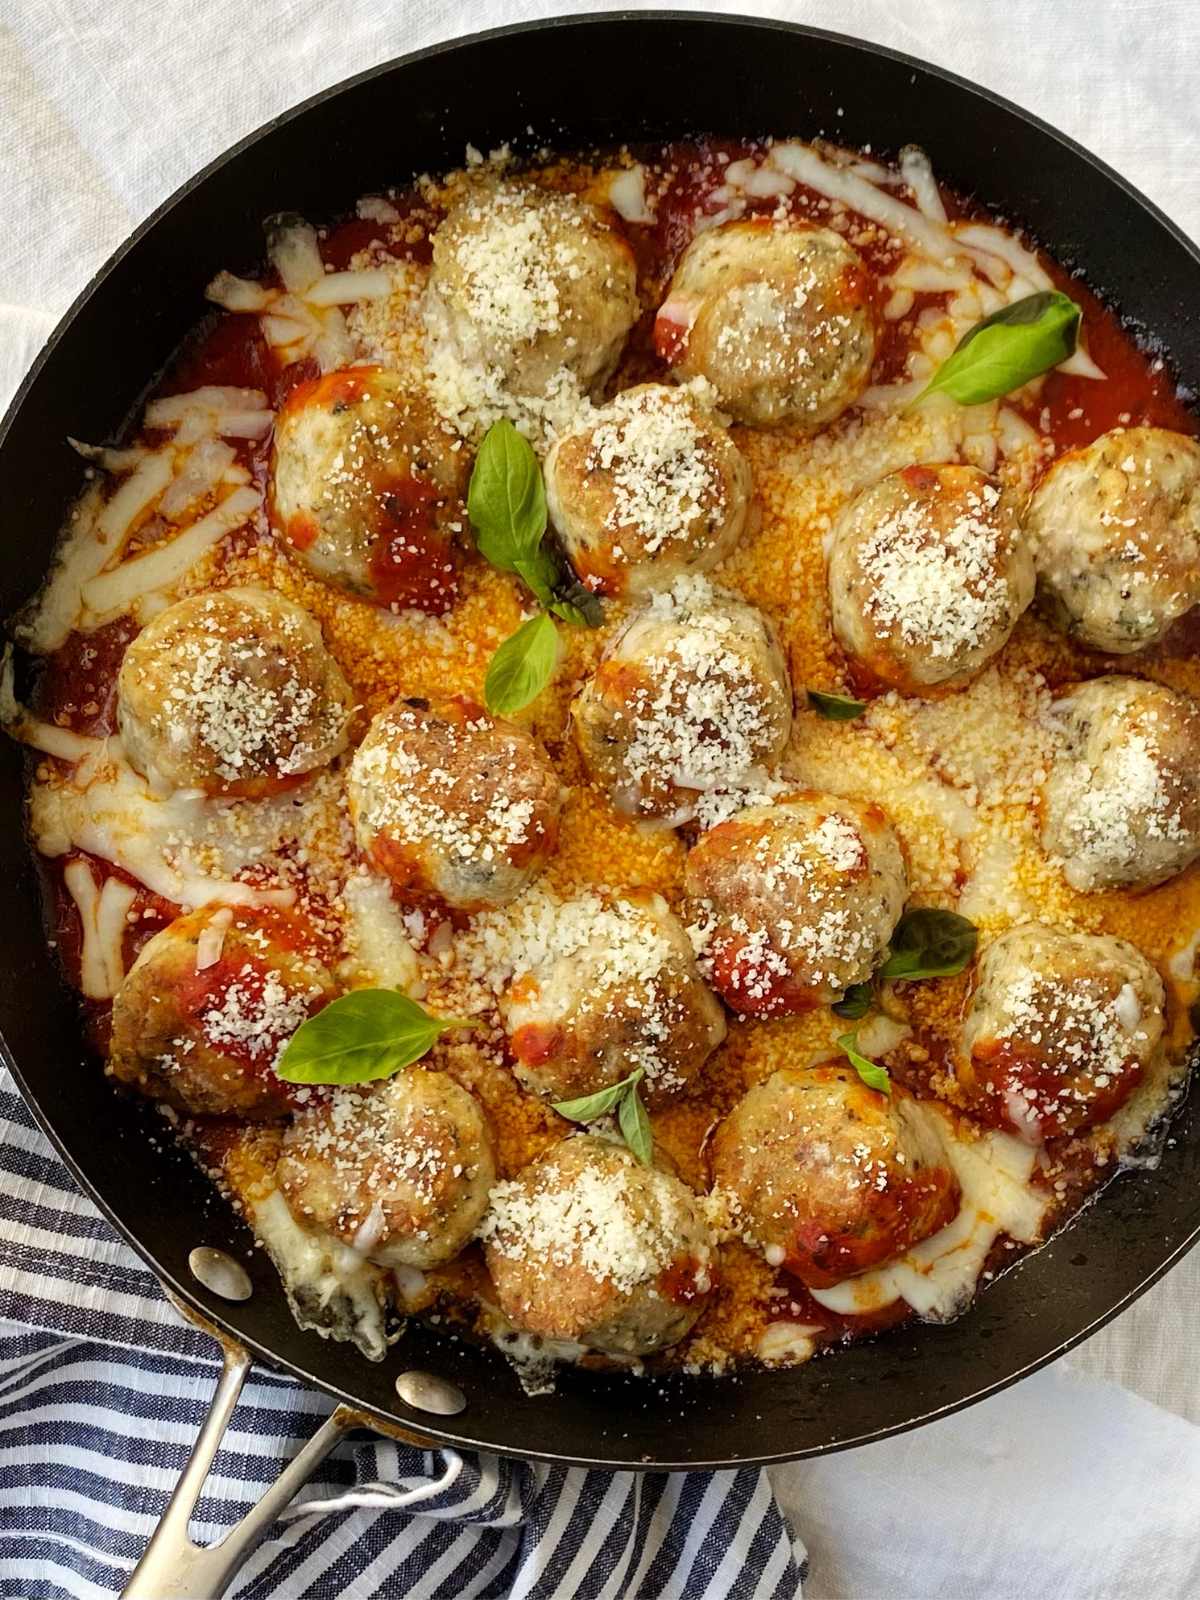 skillet of baked meatballs in sauce.